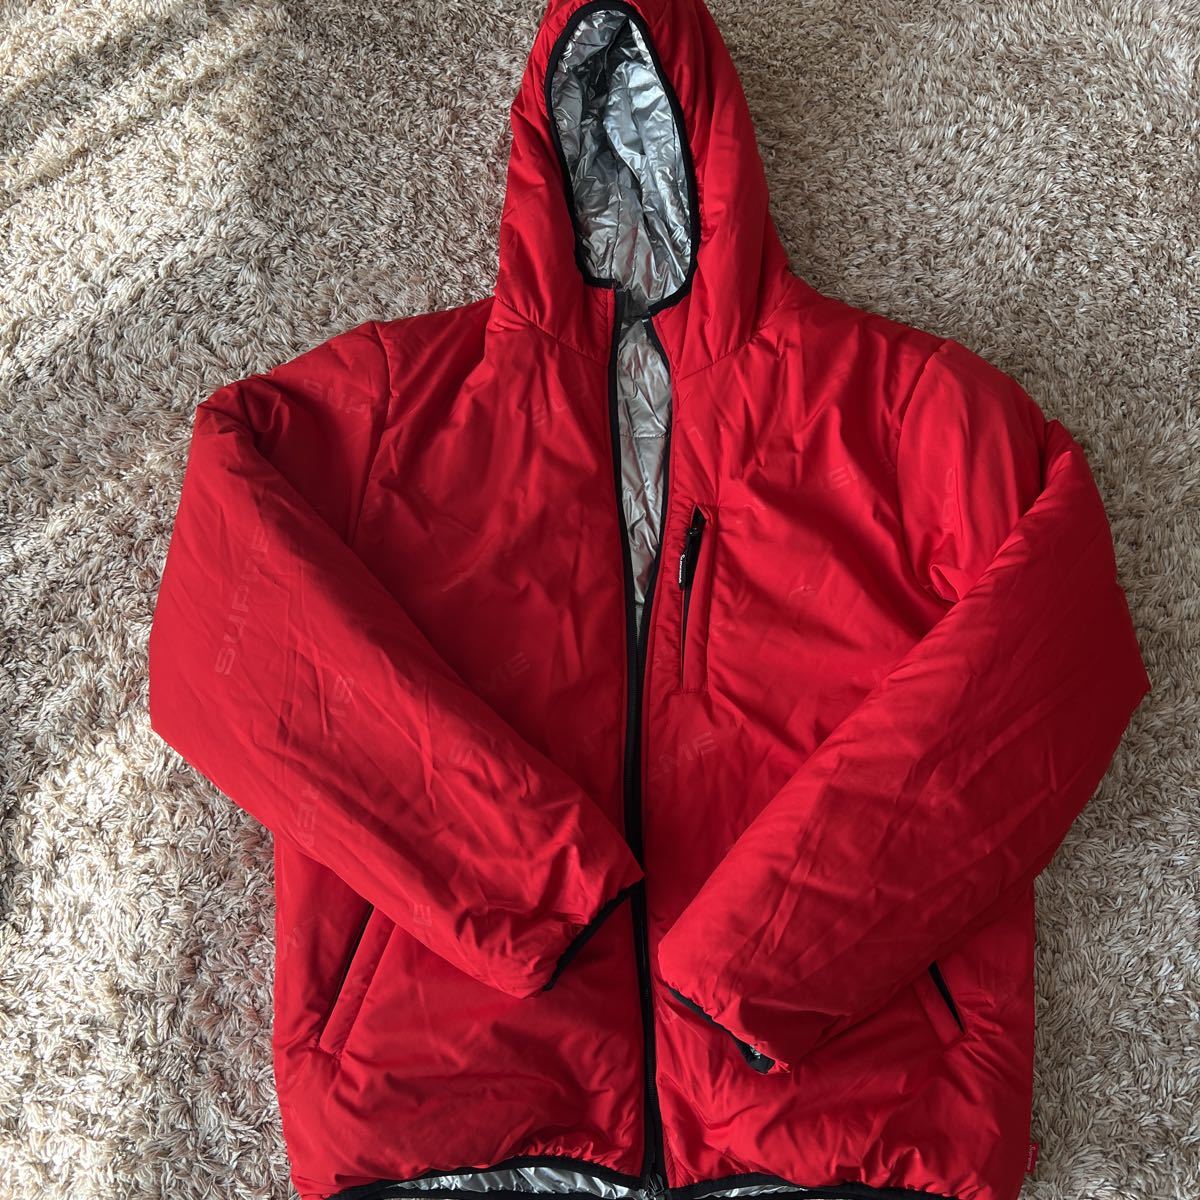 Supreme 16aw reversible hooded puffy jacket ダウン　M 赤　リバーシブル